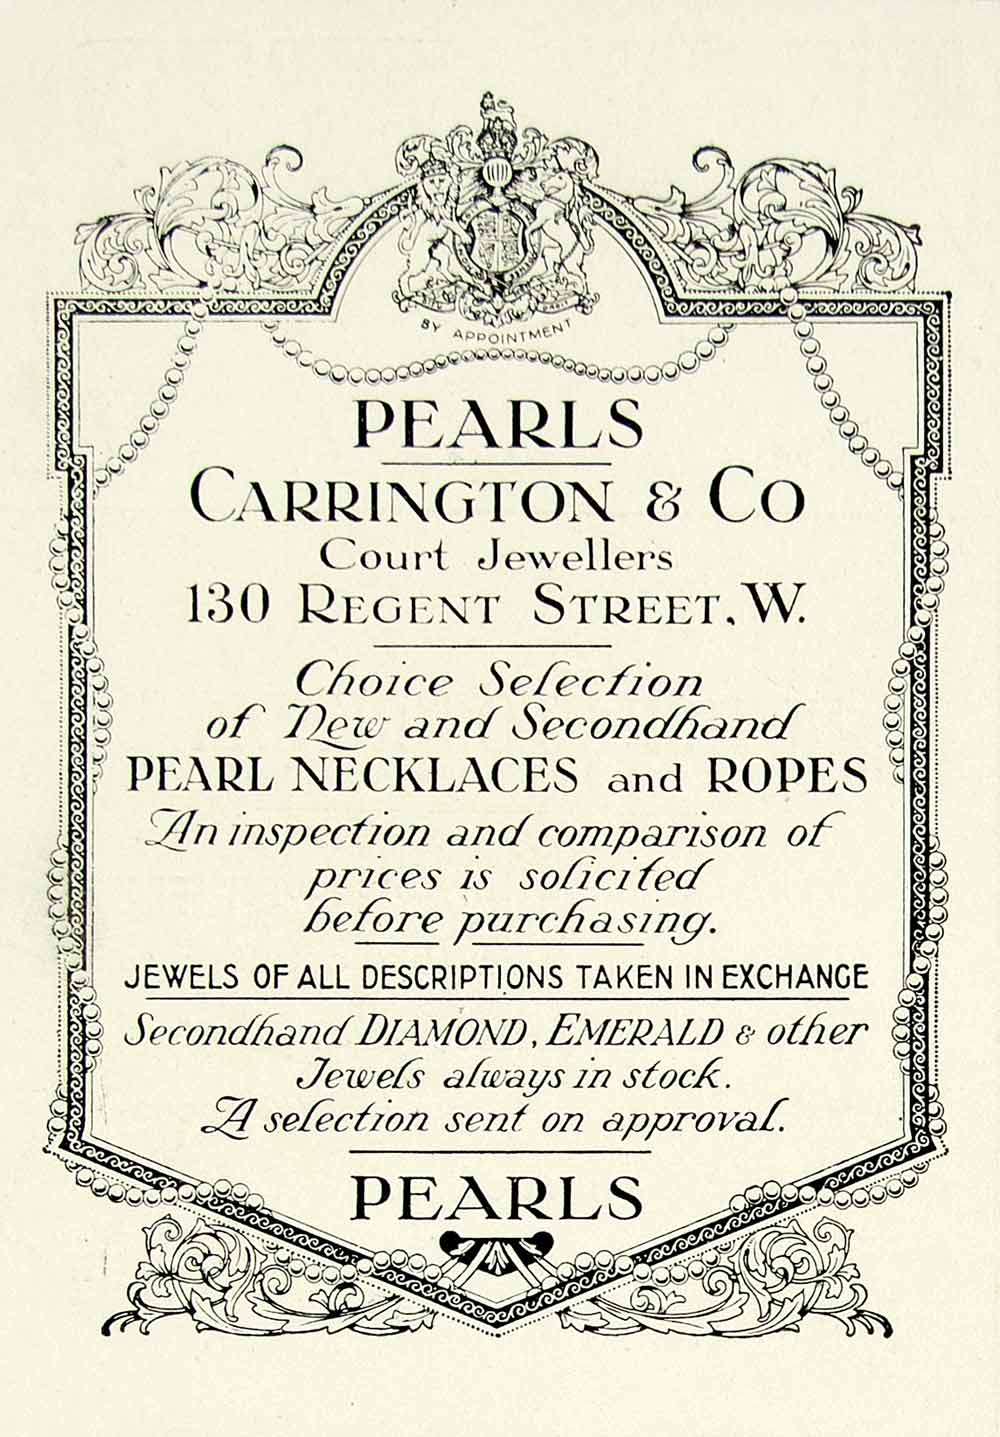 1918 Ad Secondhand Pearls Carrington Court Jewellers Necklace Jewelry YTT1